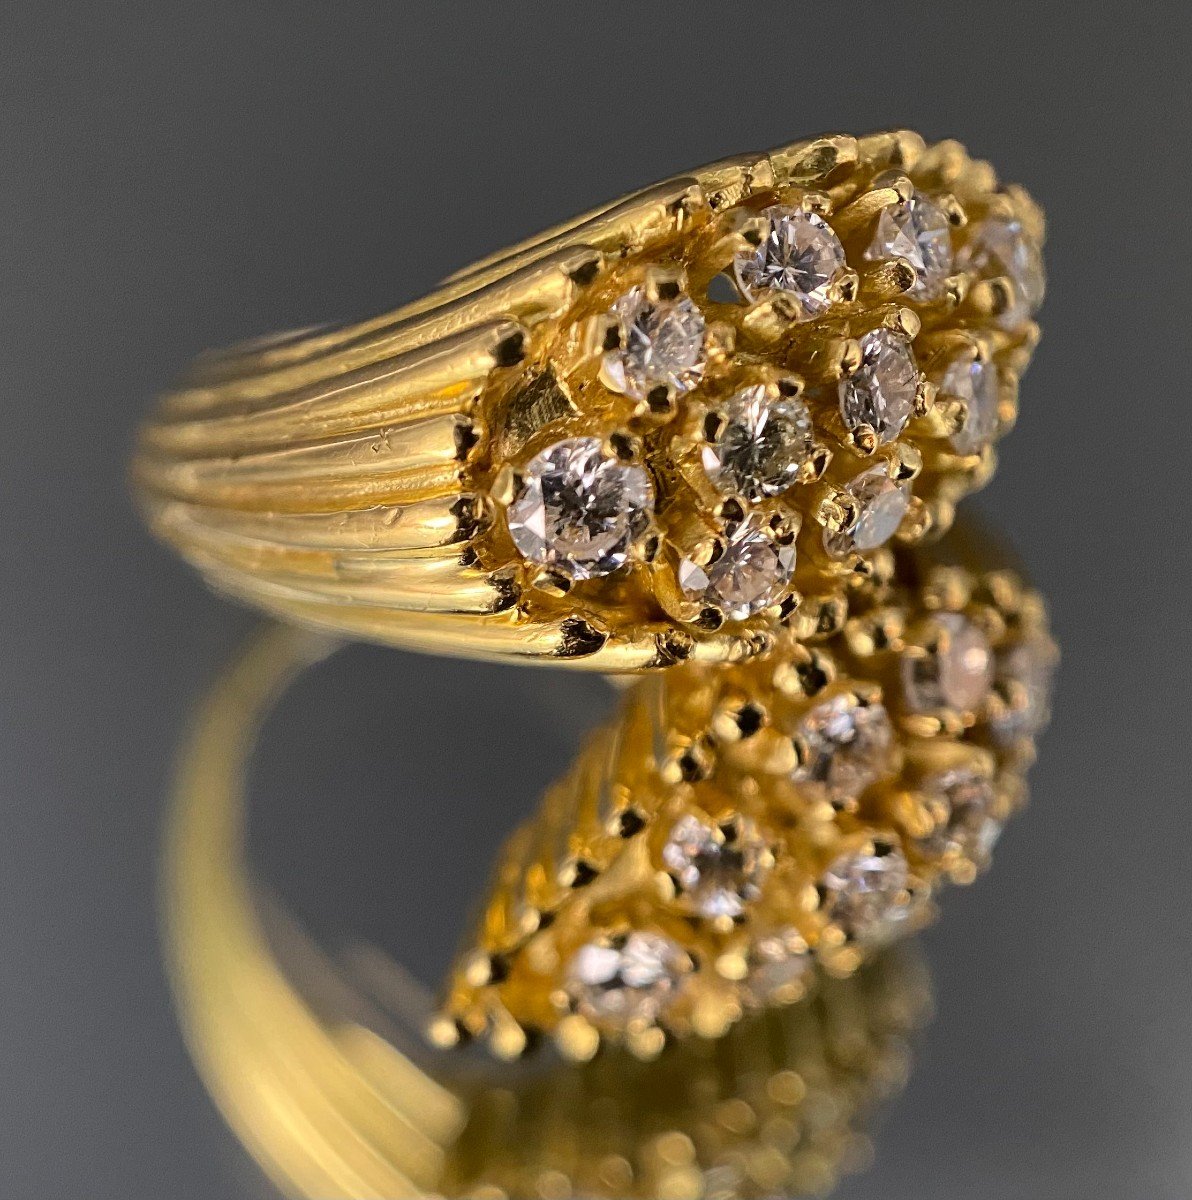 Ring In 18k Yellow Gold In The Shape Of Snake Head Set With 1 Carat Of Diamonds